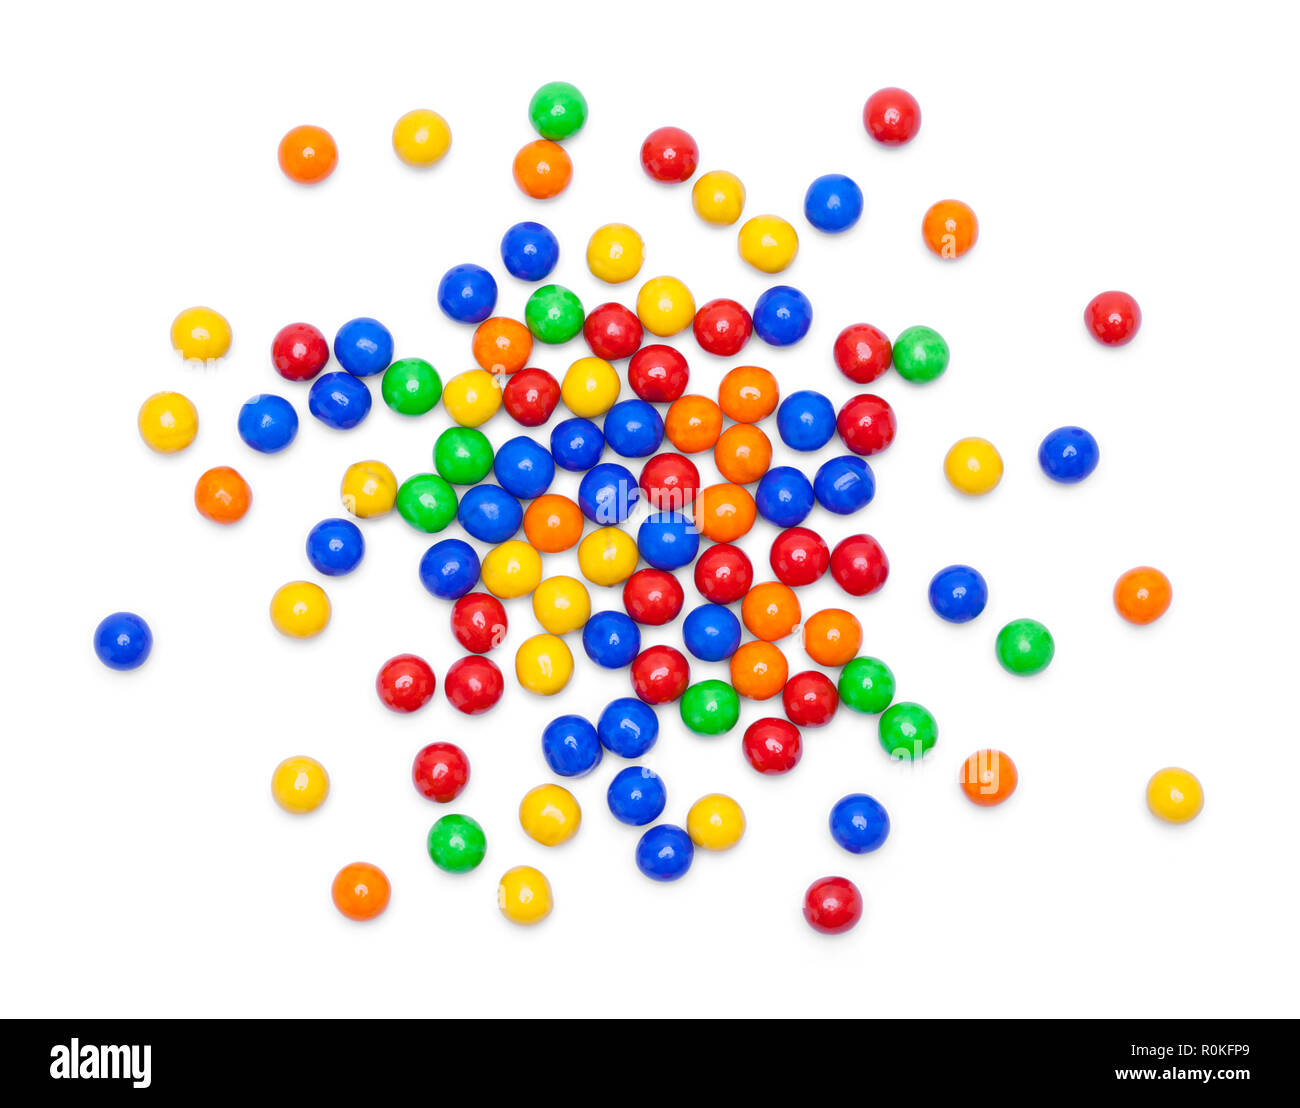 Colorful Round Candy Balls Scattered on a White Background. Stock Photo